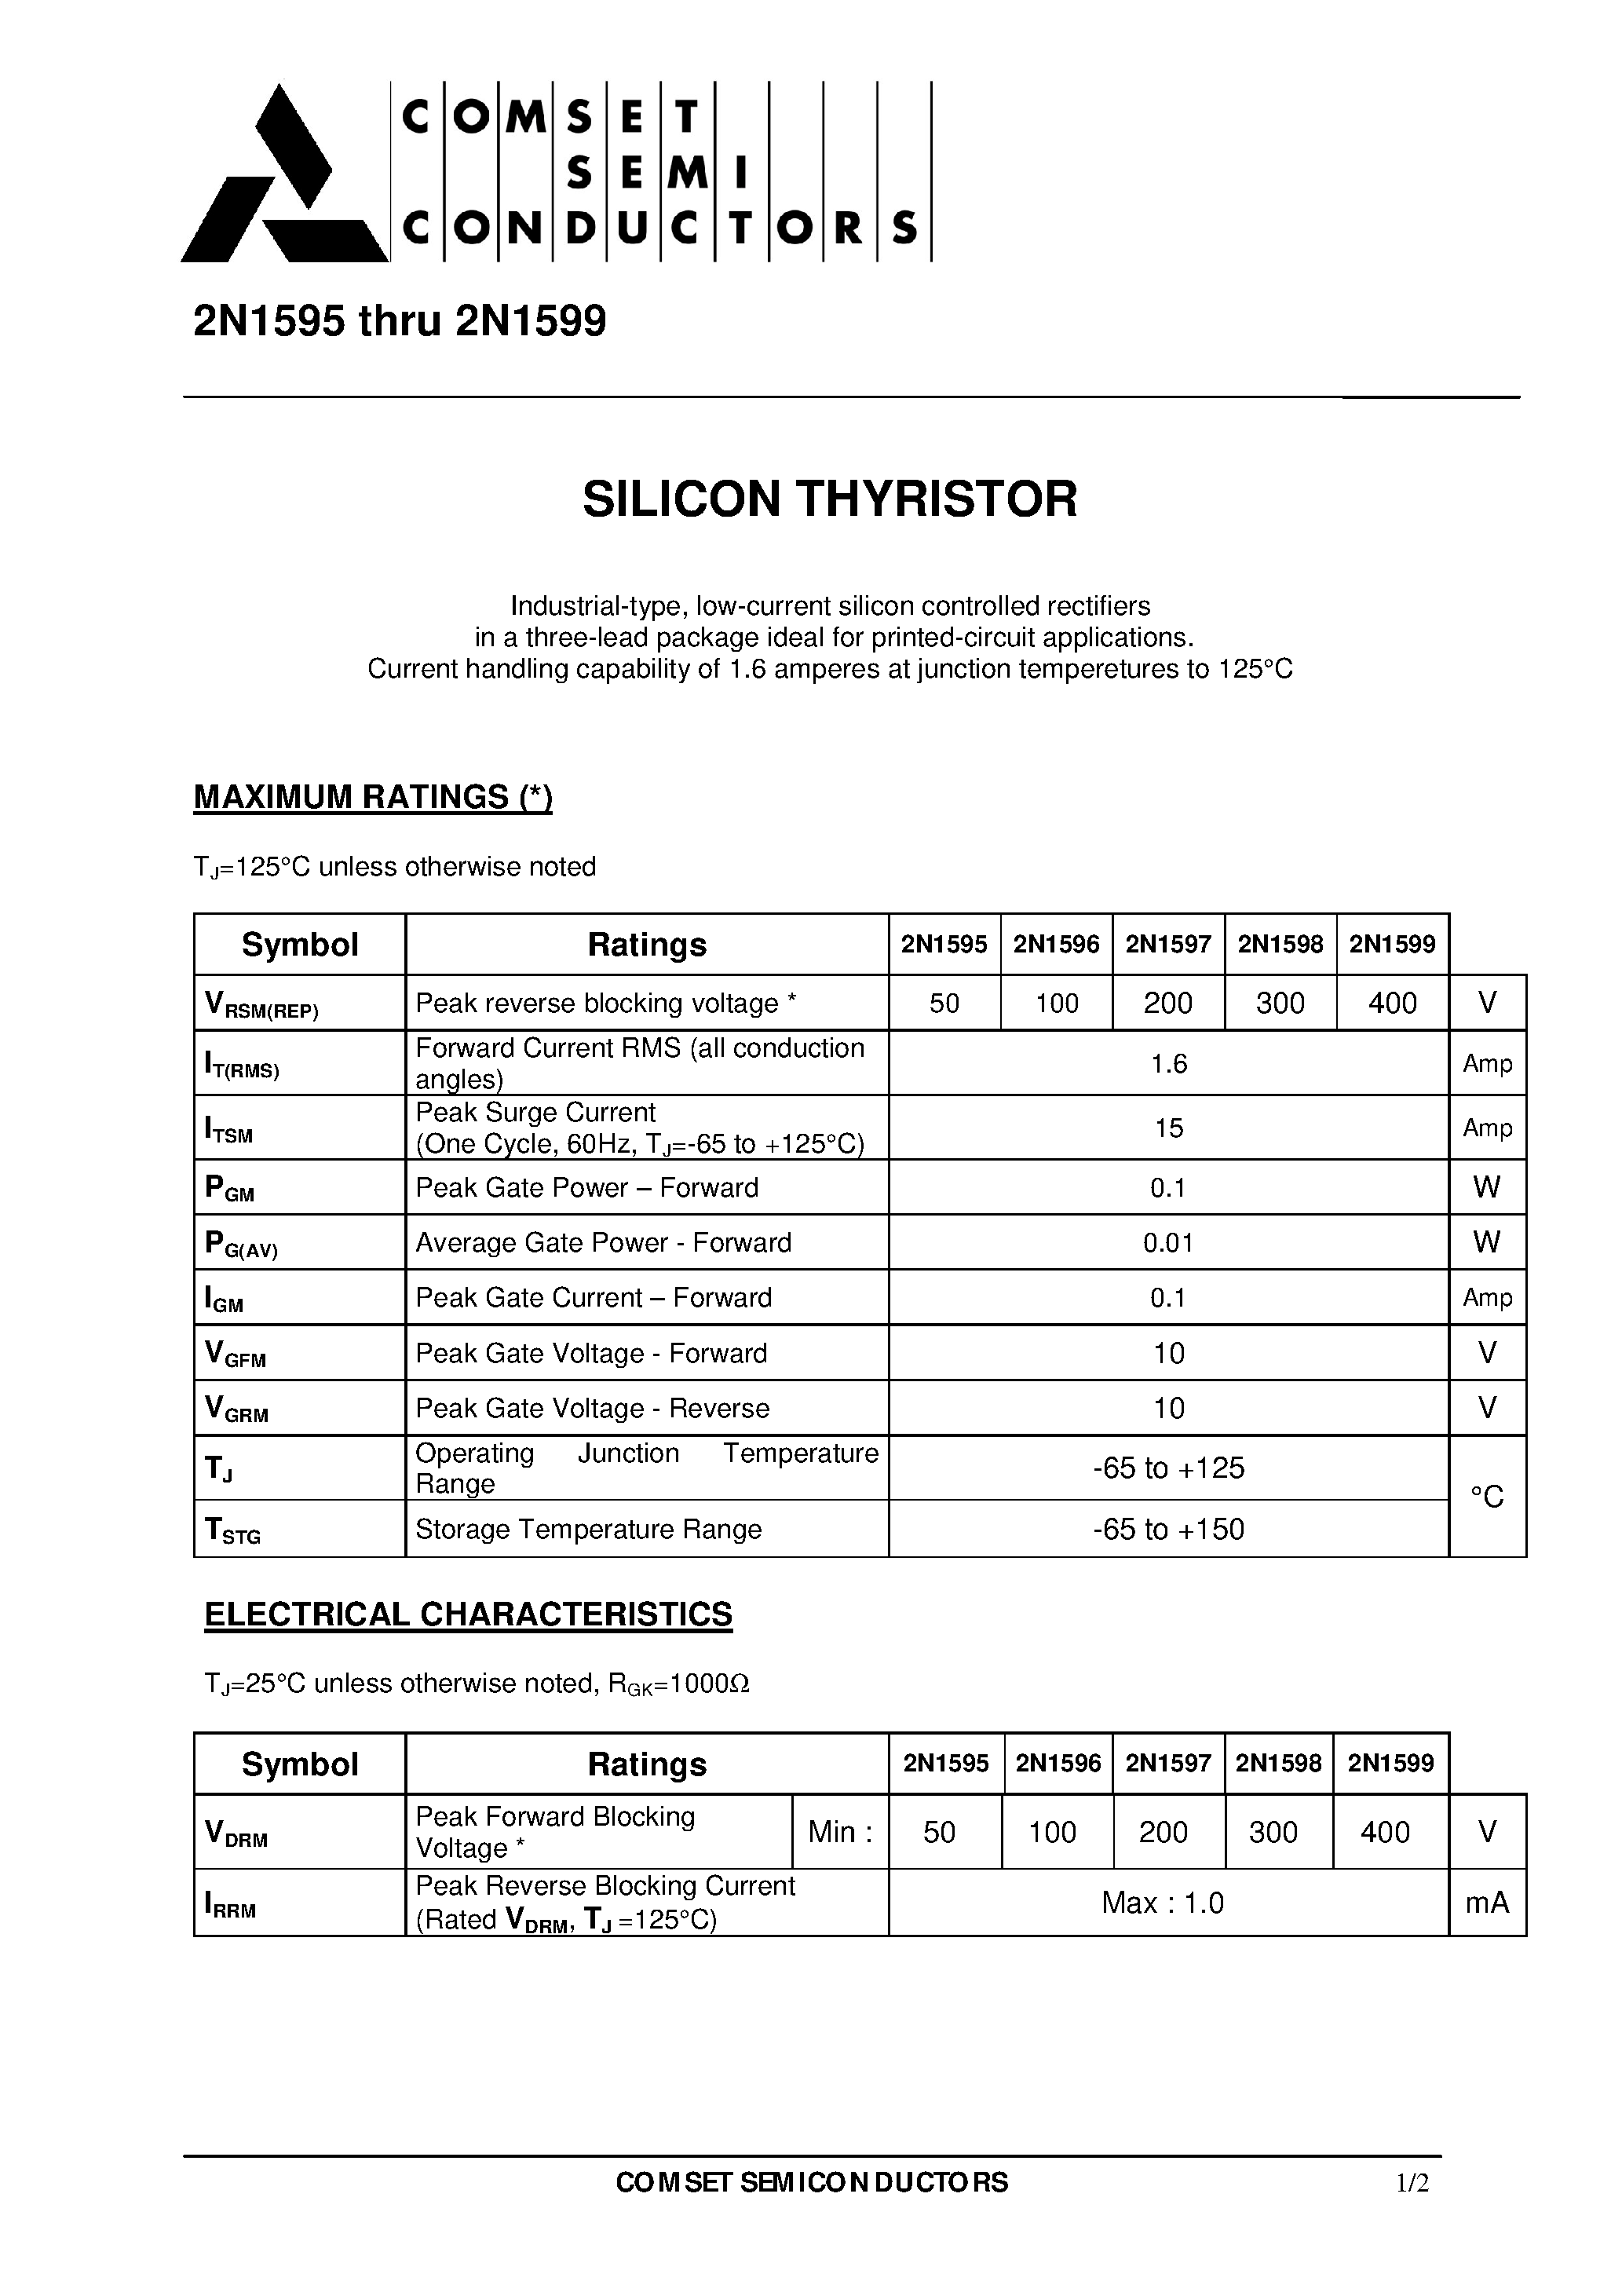 Datasheet 2N1596 - SILICON THYRISTOR(low-current silicon controlled rectifiers in a three-lead package ideal for printed-circuit) page 1